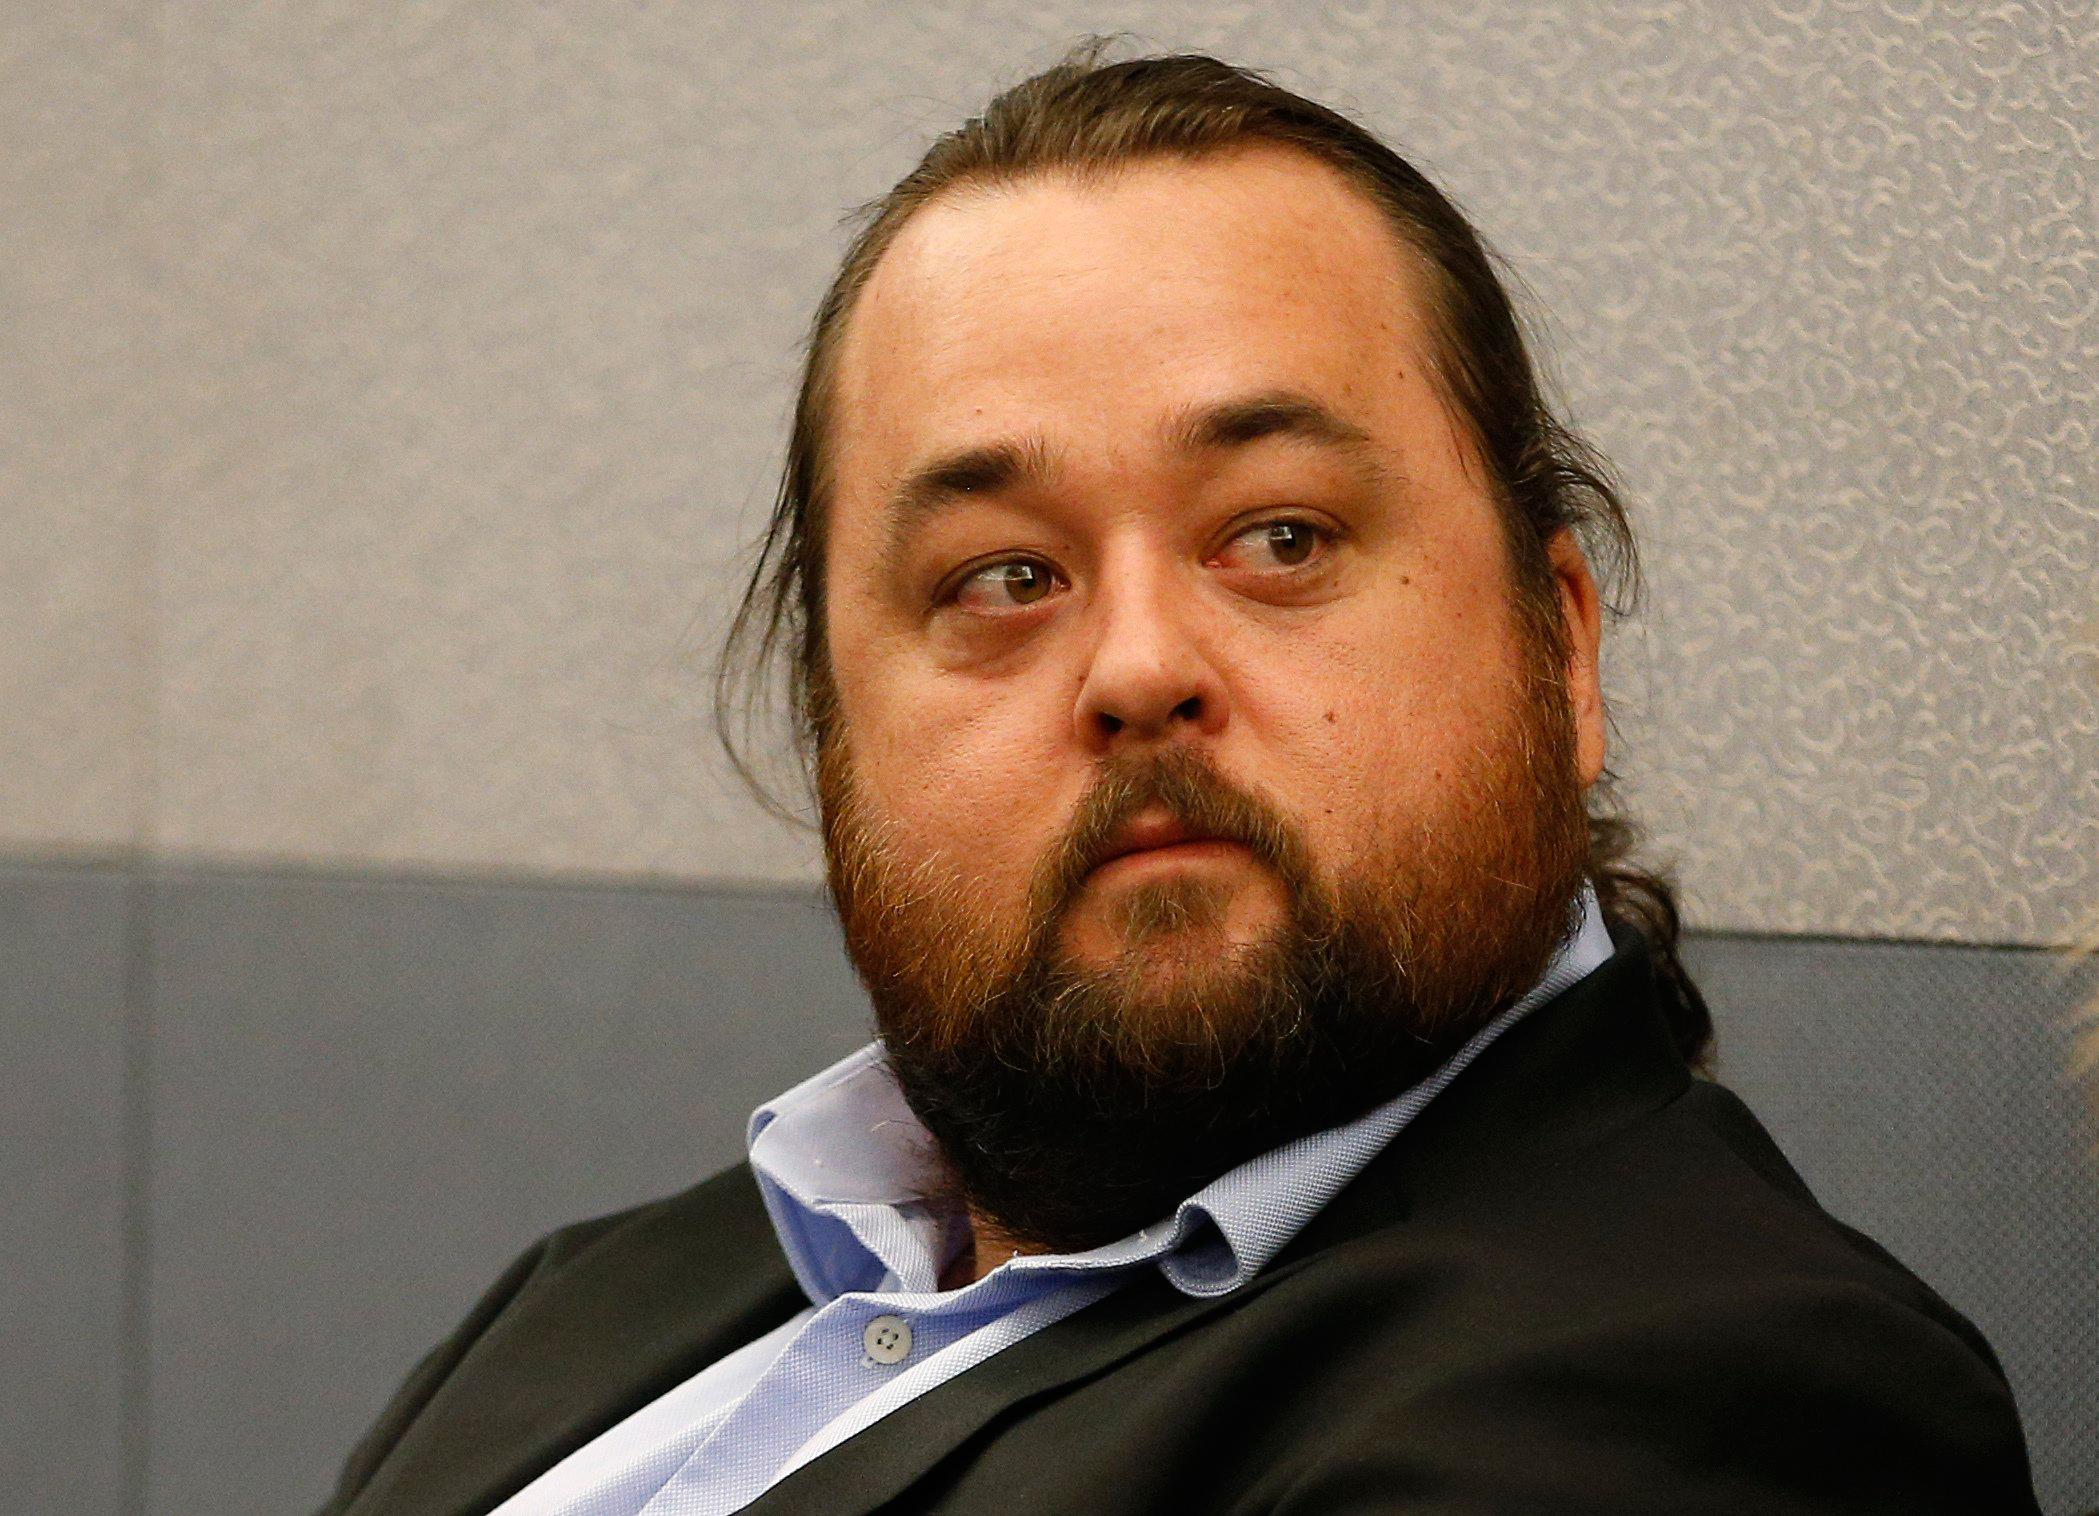 Austin Lee Russell, better known as Chumlee from the TV series "Pawn Stars," appears in court in Las Vegas on May 23, 2016. (John Locher—AP)